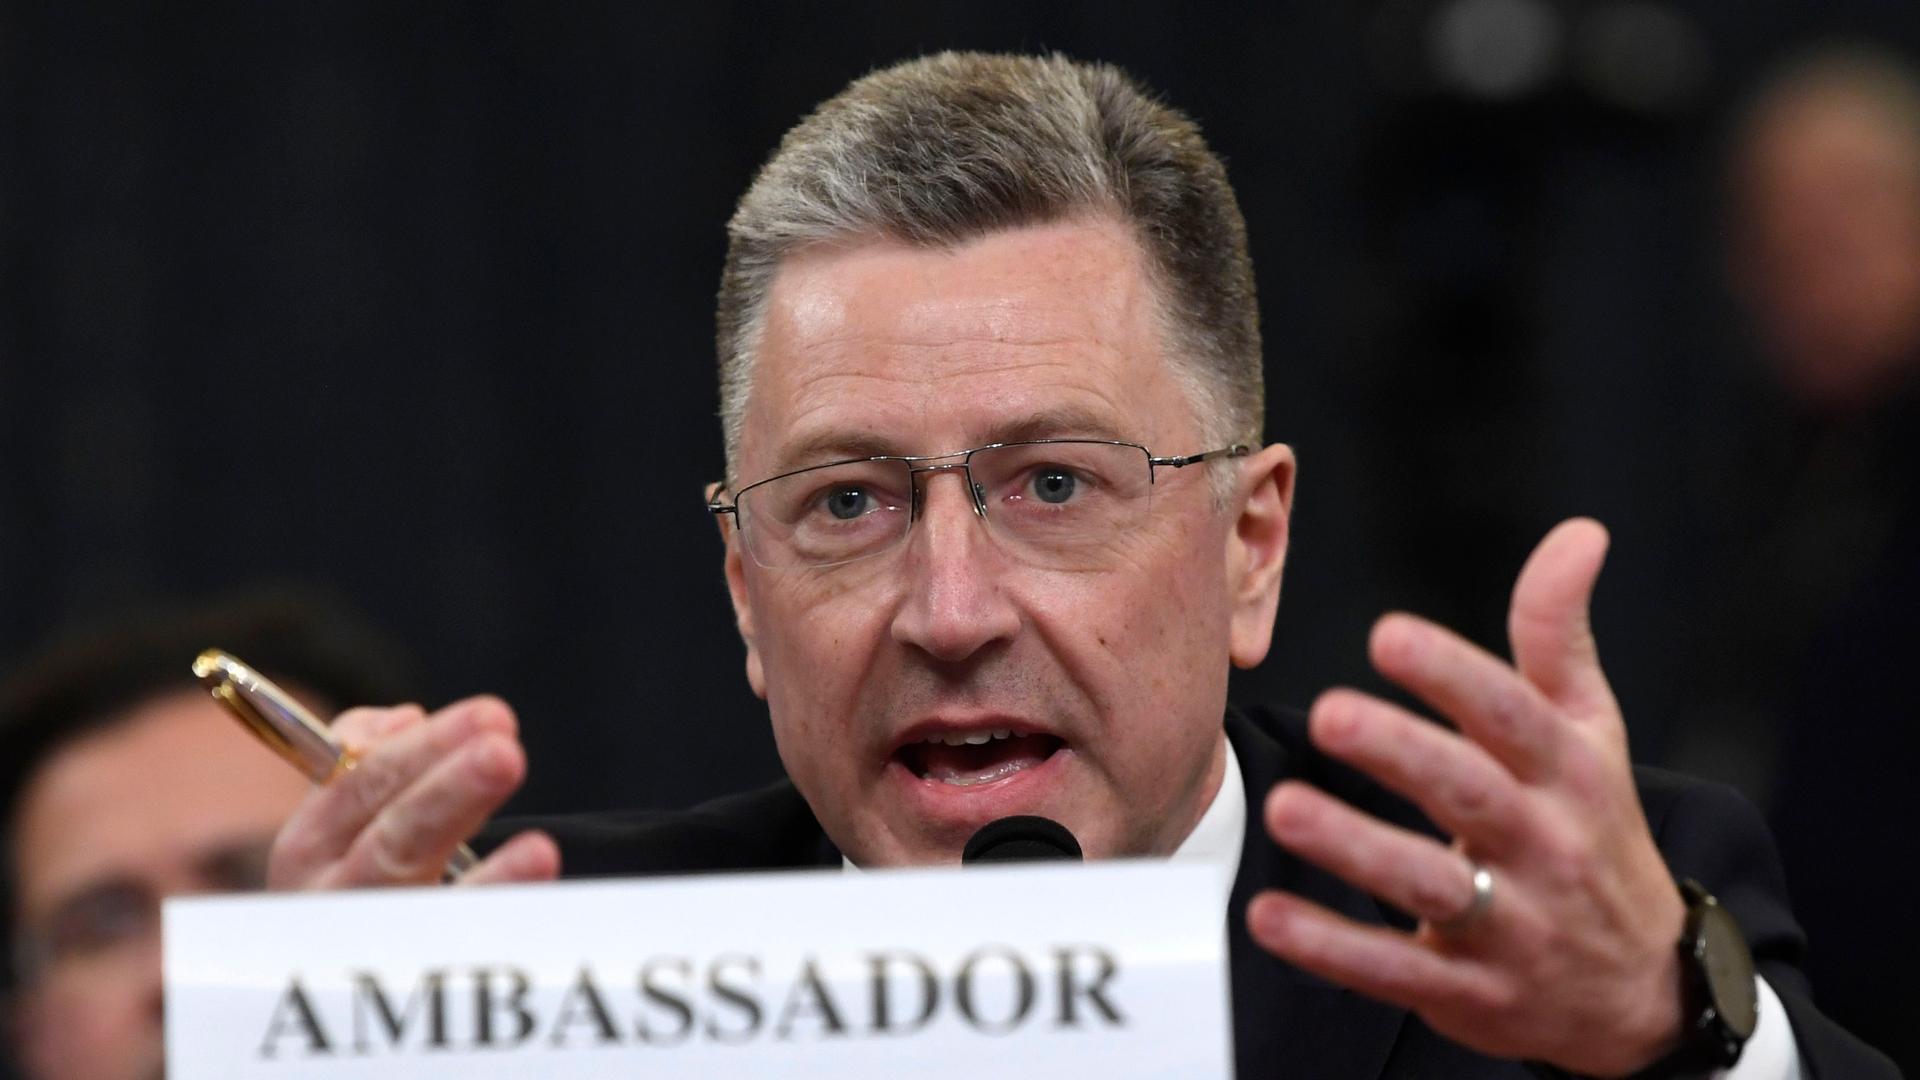 A white man wearing glasses with short hair gestures with his hands while speaking with an "ambassador" sign.